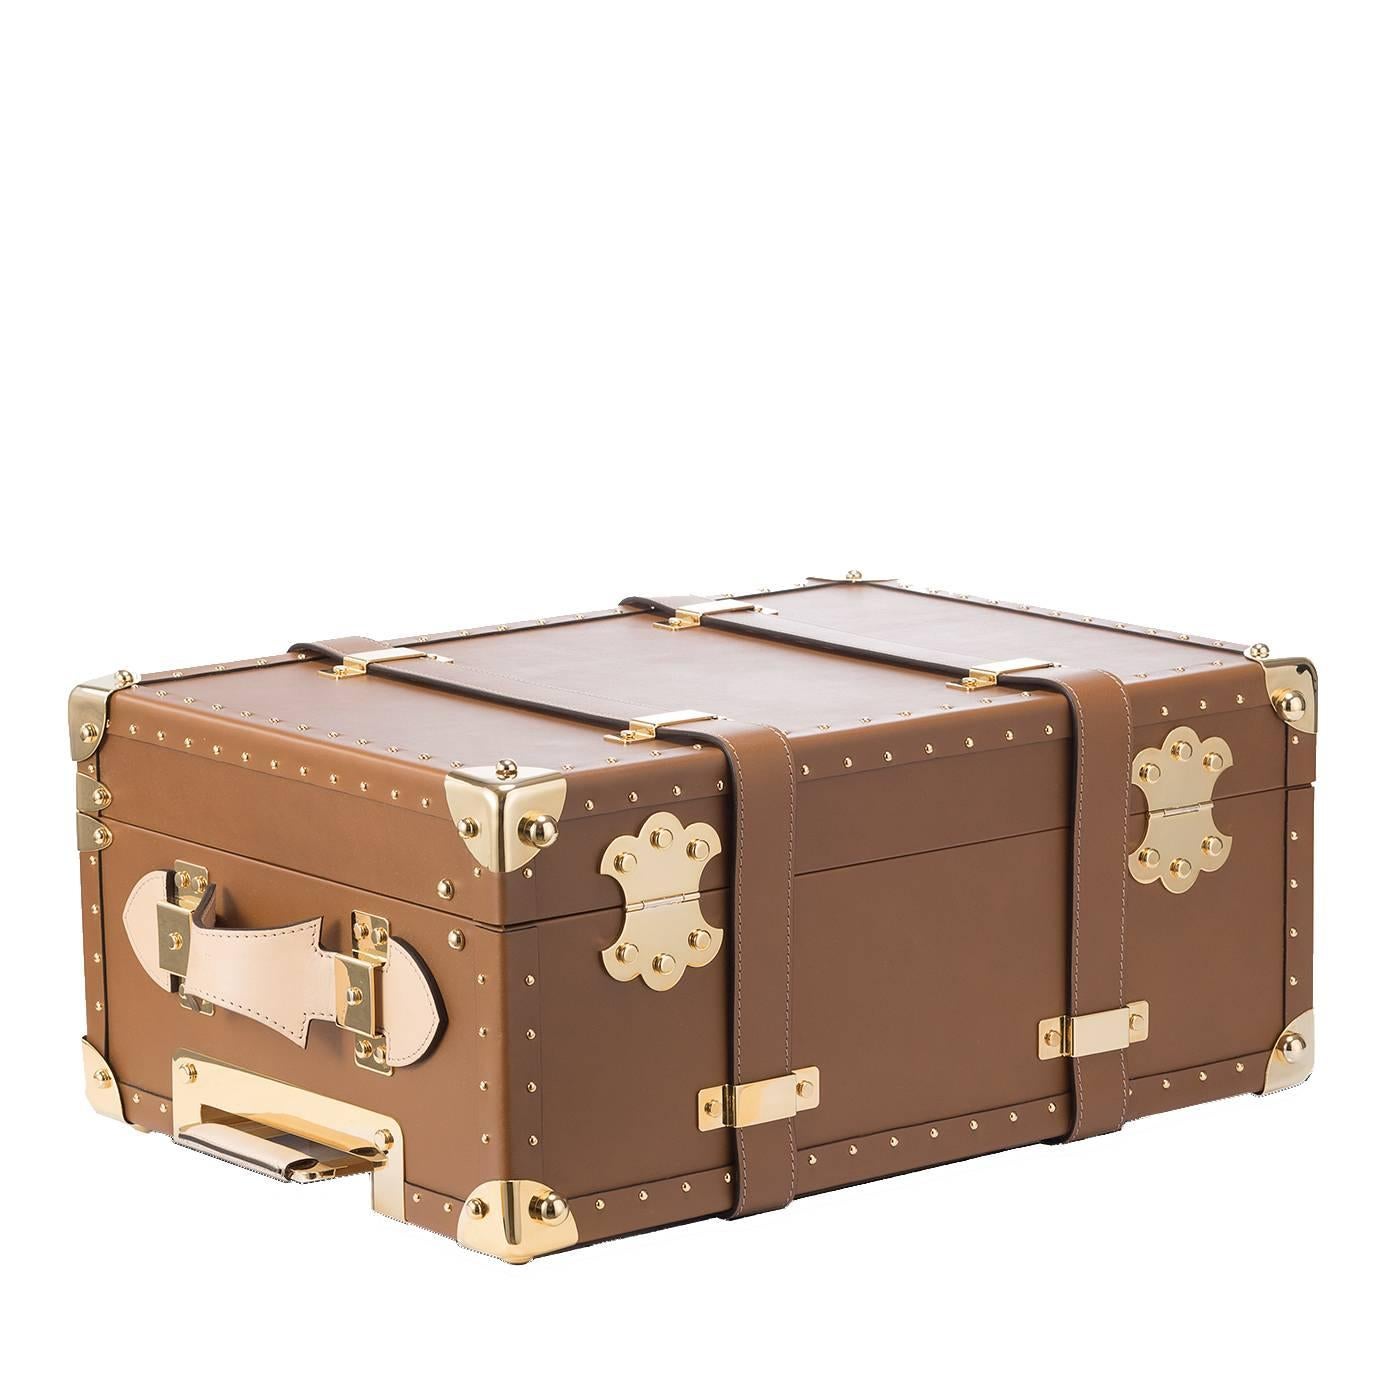 This elegant and light trolley is a refined piece of luggage with an old-fashioned appeal. The exterior is in cognac-colored leather with vacchetta leather handles. The extendable handle and the metal details are in aluminium with a gold finish. The